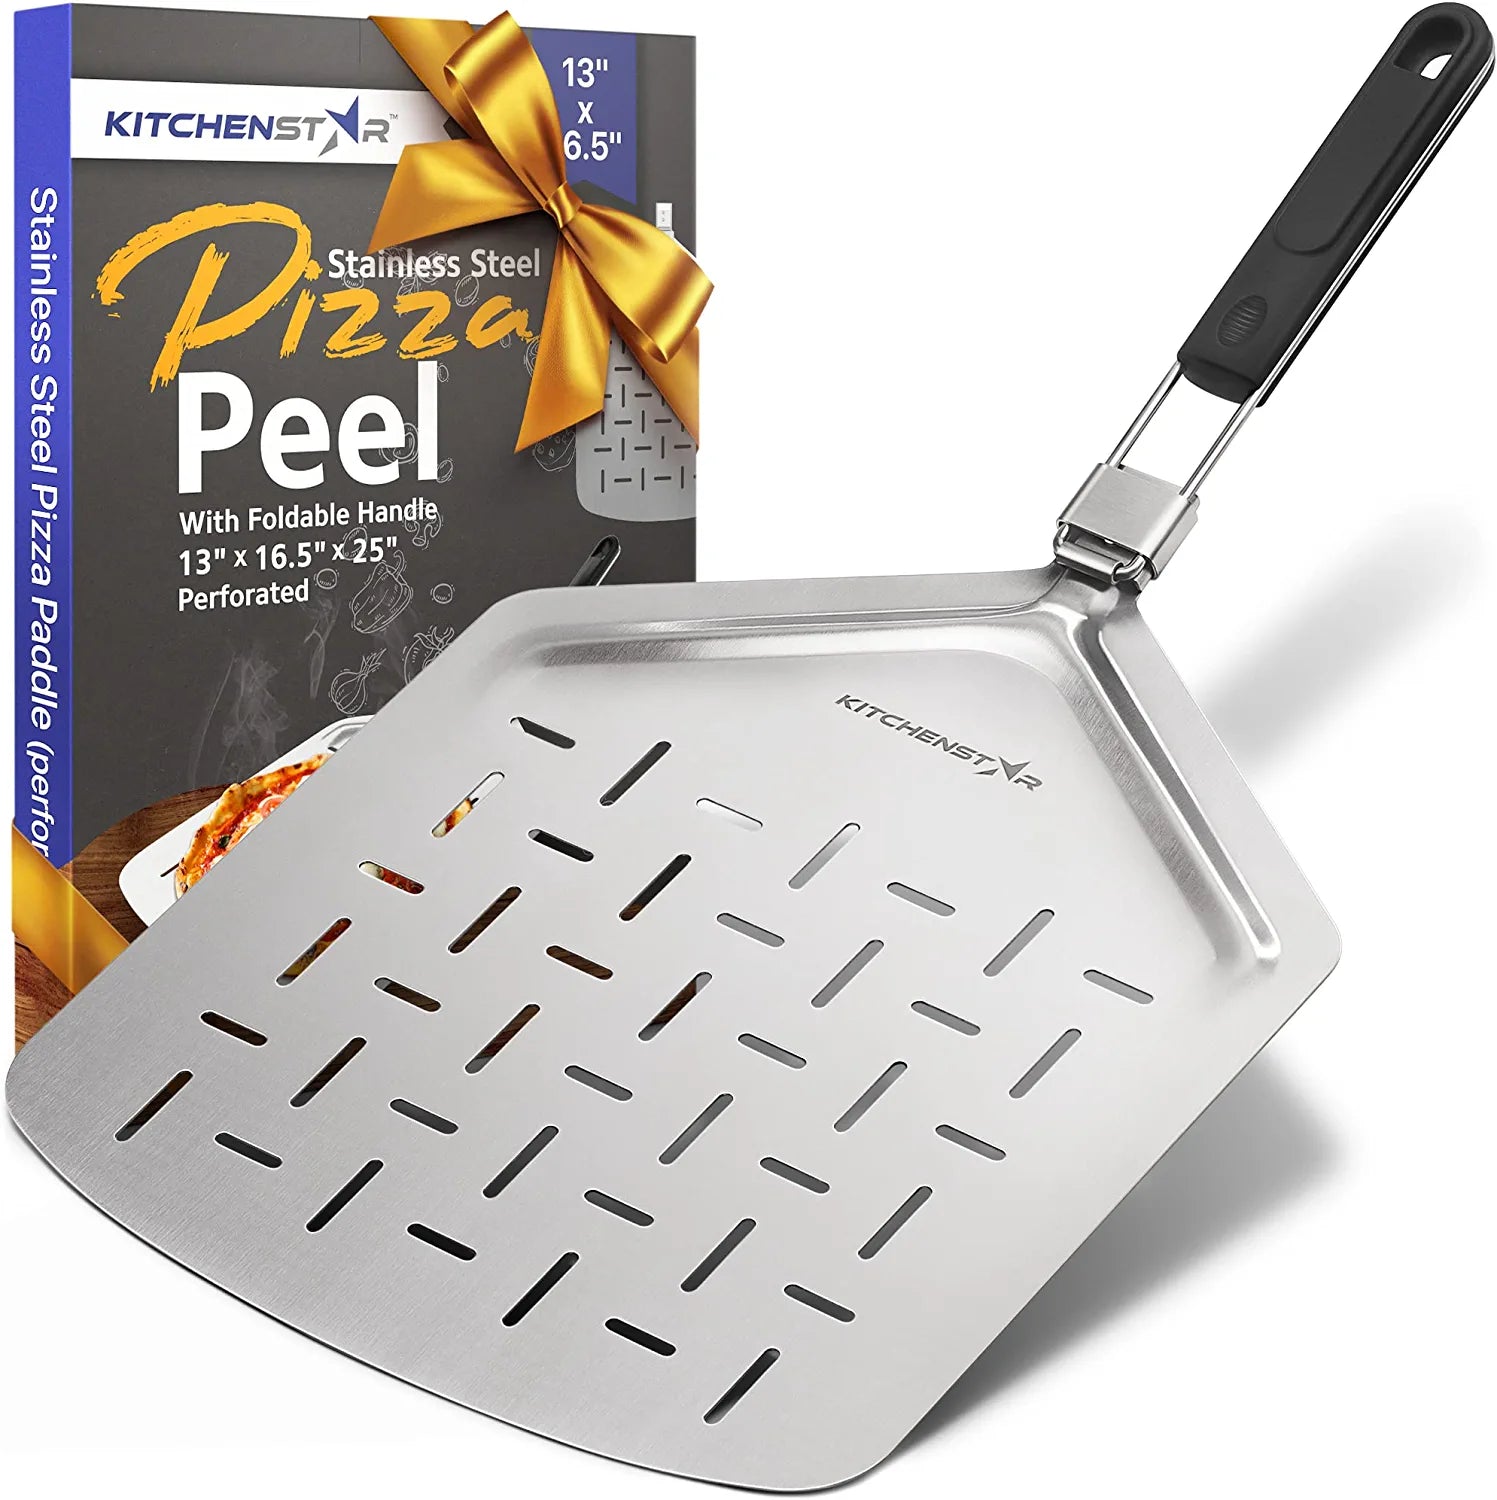 KitchenStar Perforated Stainless Steel Pizza Peel with Folding Handle